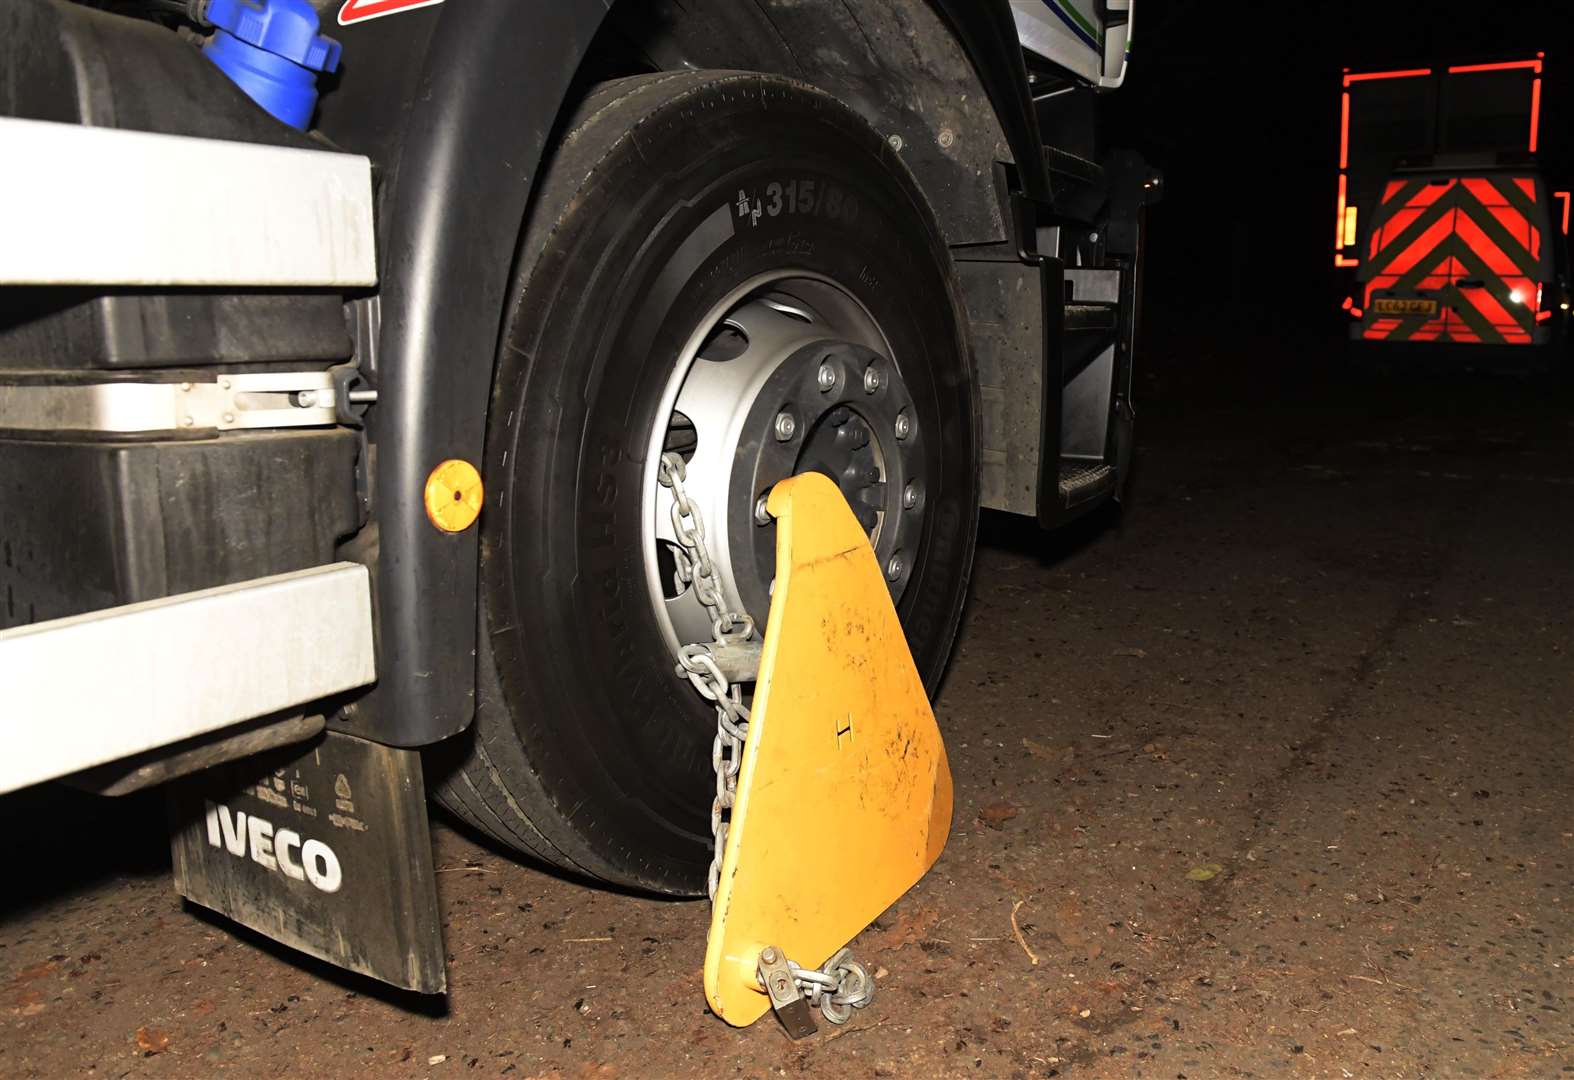 Lorries have been clamped in Ashford since 2017